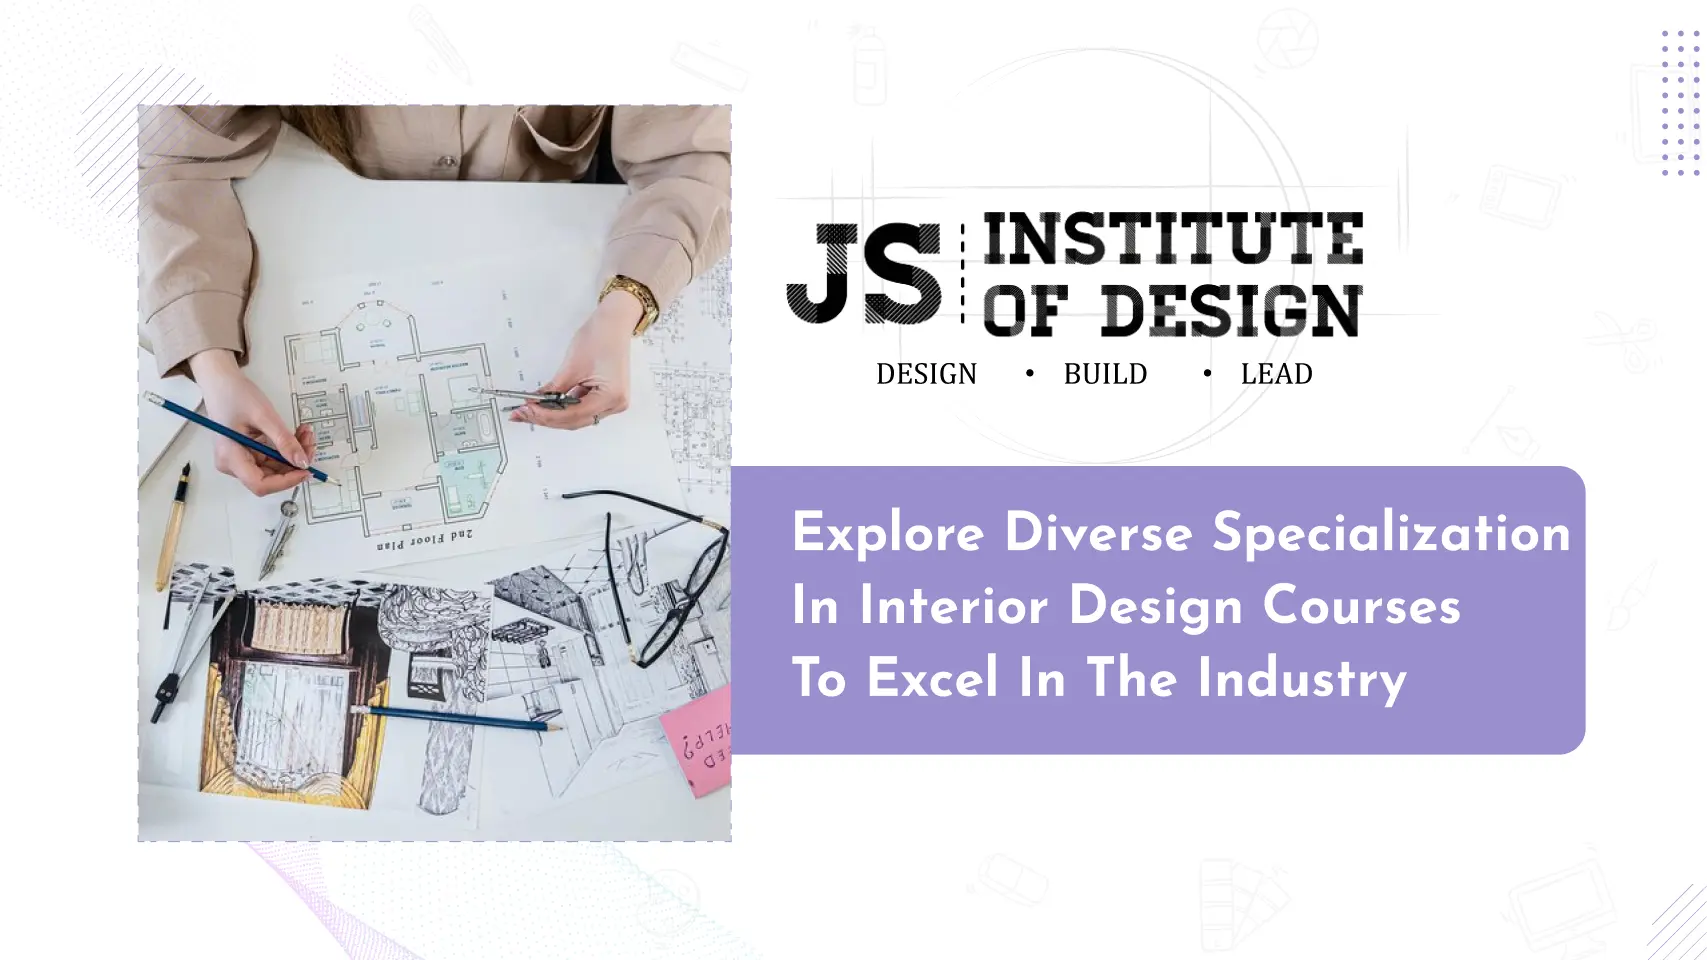 Explore Diverse Specialization in Interior Design Courses to Excel in the Industry